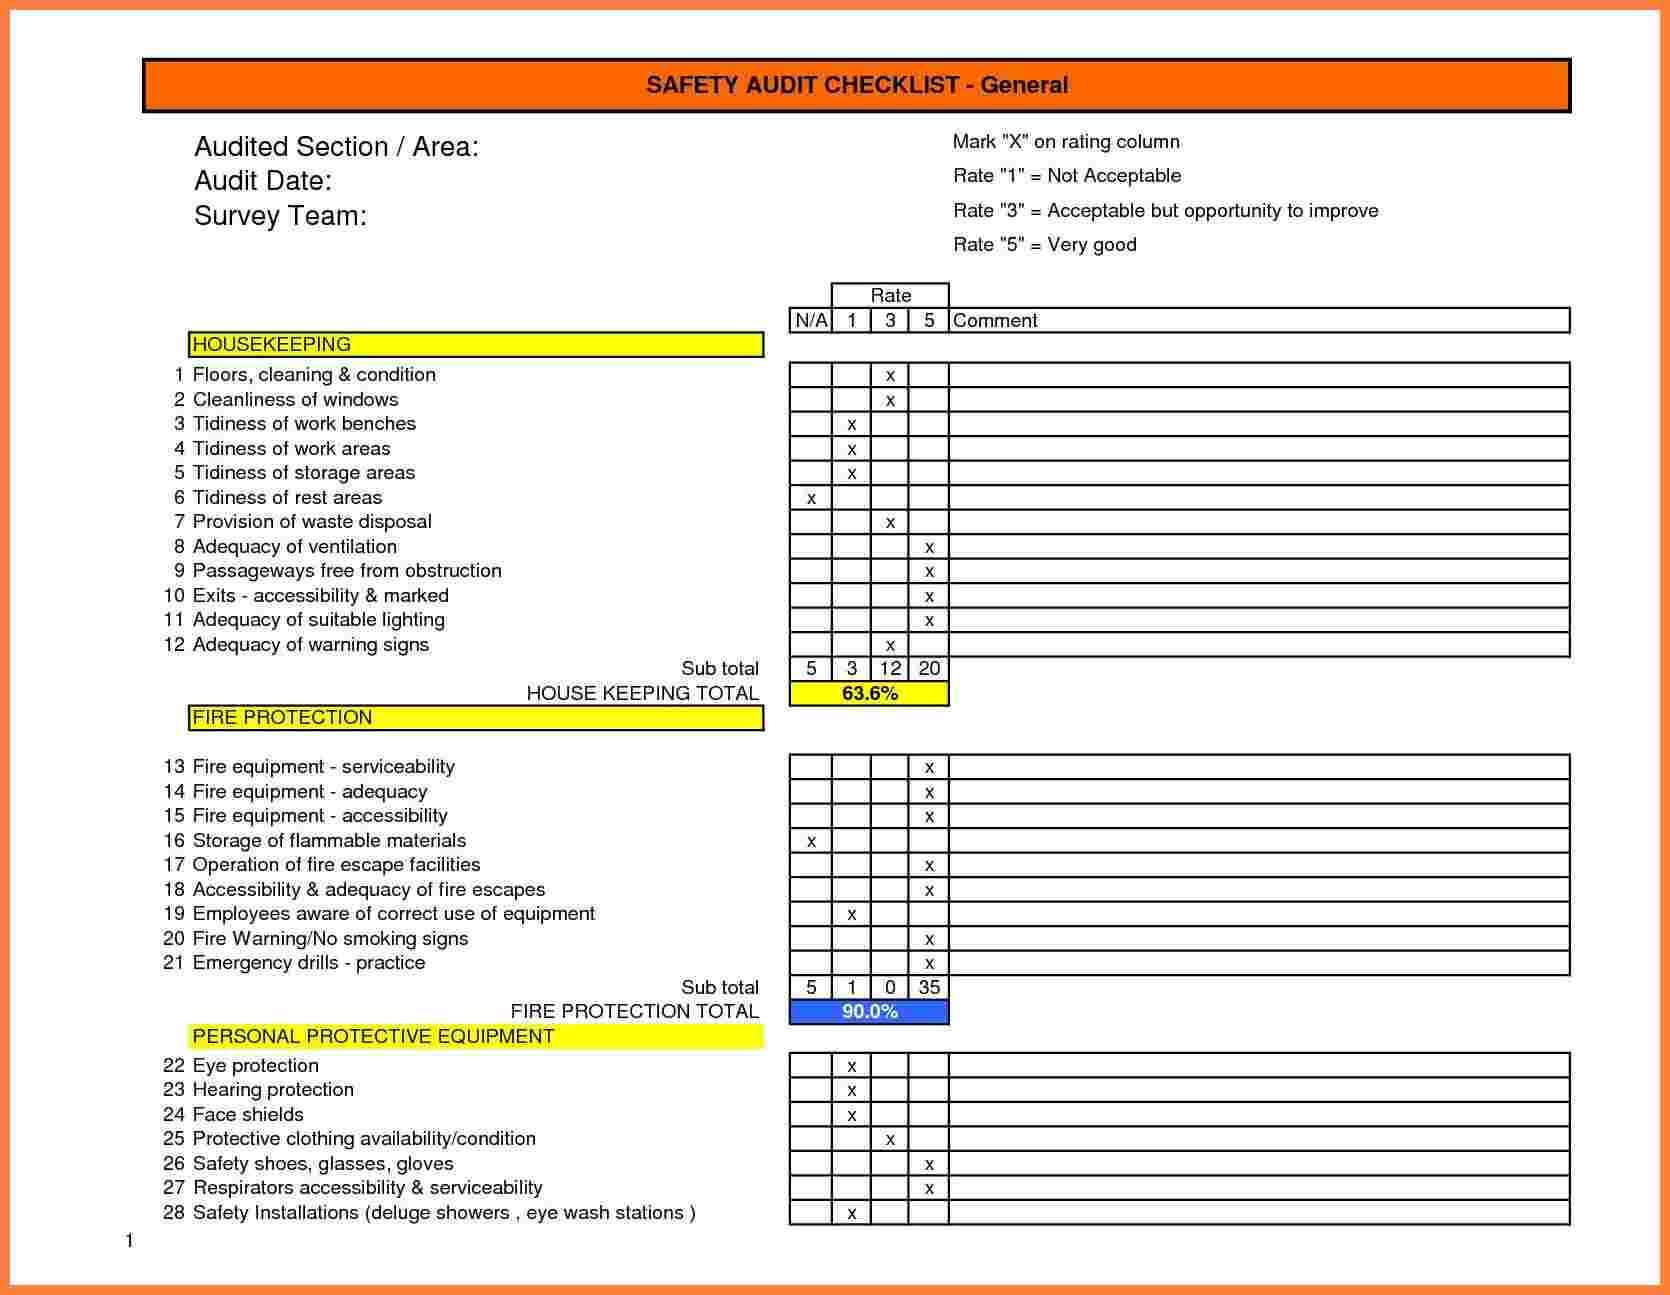 Image Result For Warehouse Health And Safety Audit Form Regarding Safety Analysis Report Template